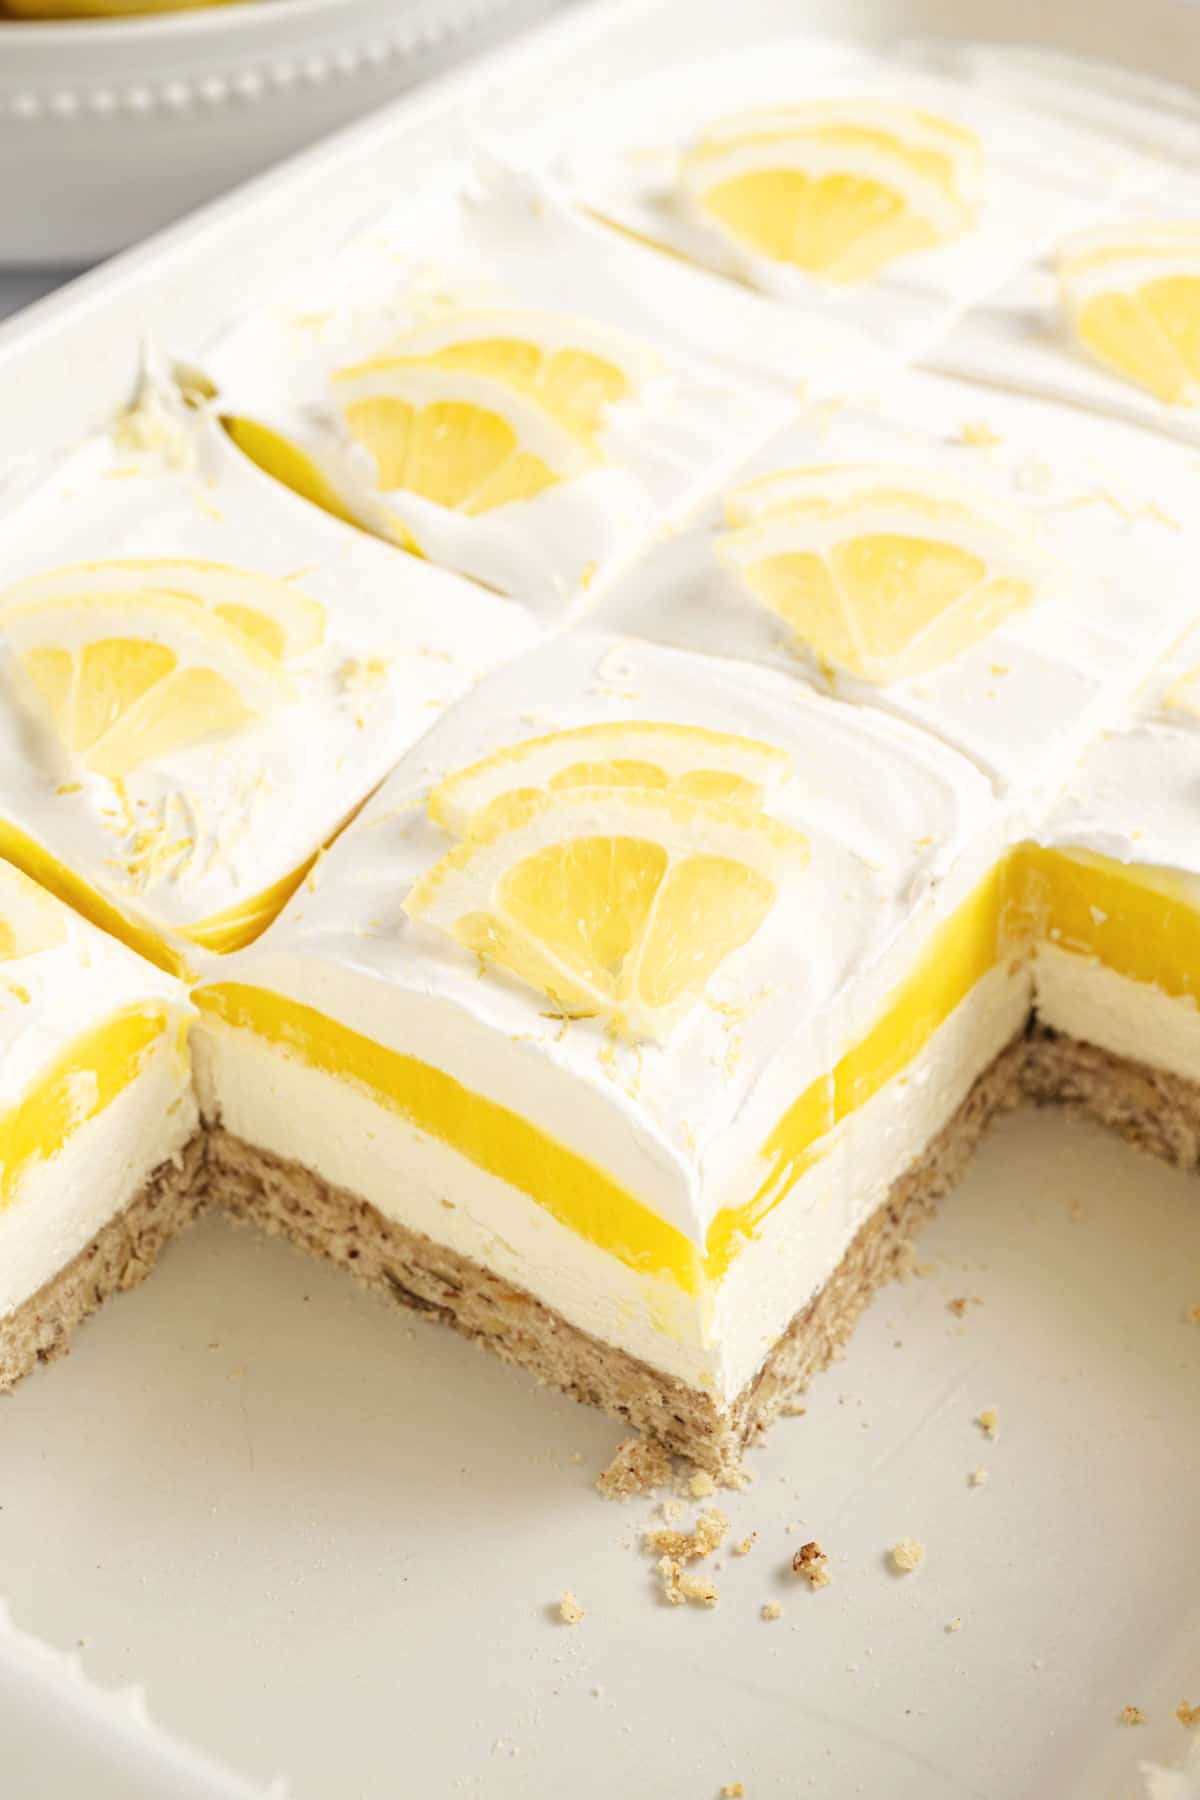 Pan of lemon lush with a few slices removed.